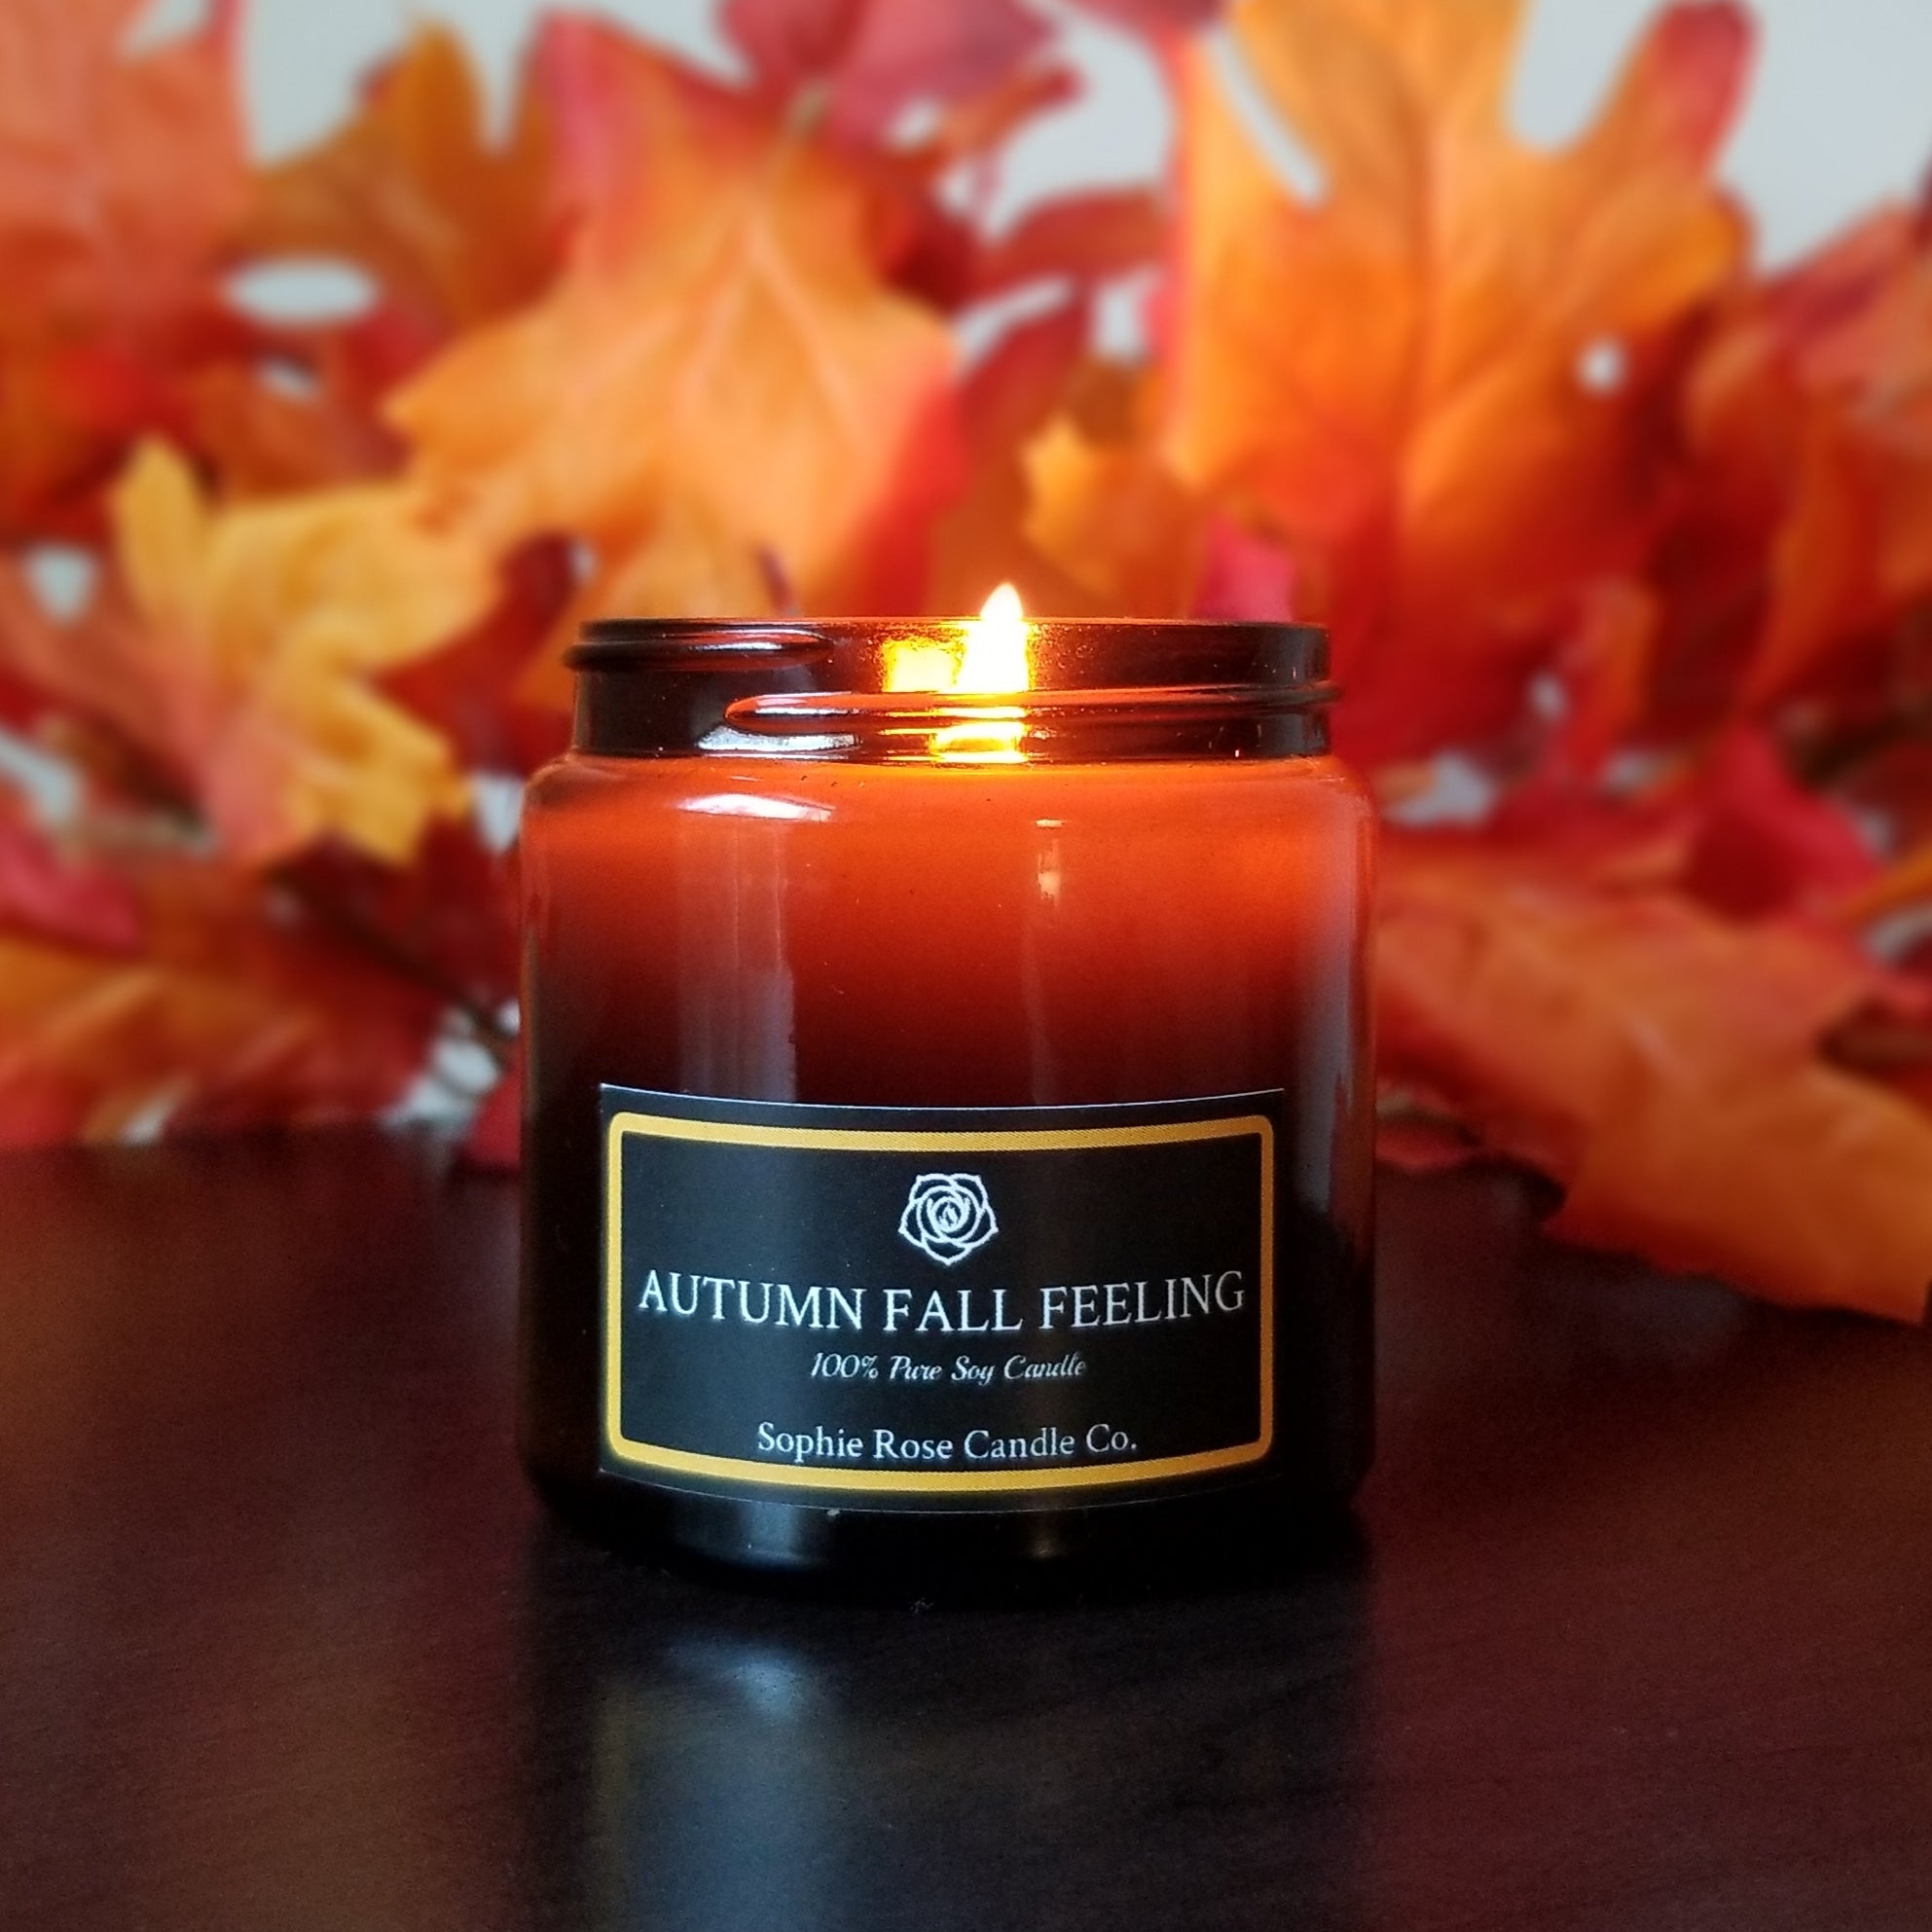 Autumn Fall Feeling by Sophie Rose Candle Co. 